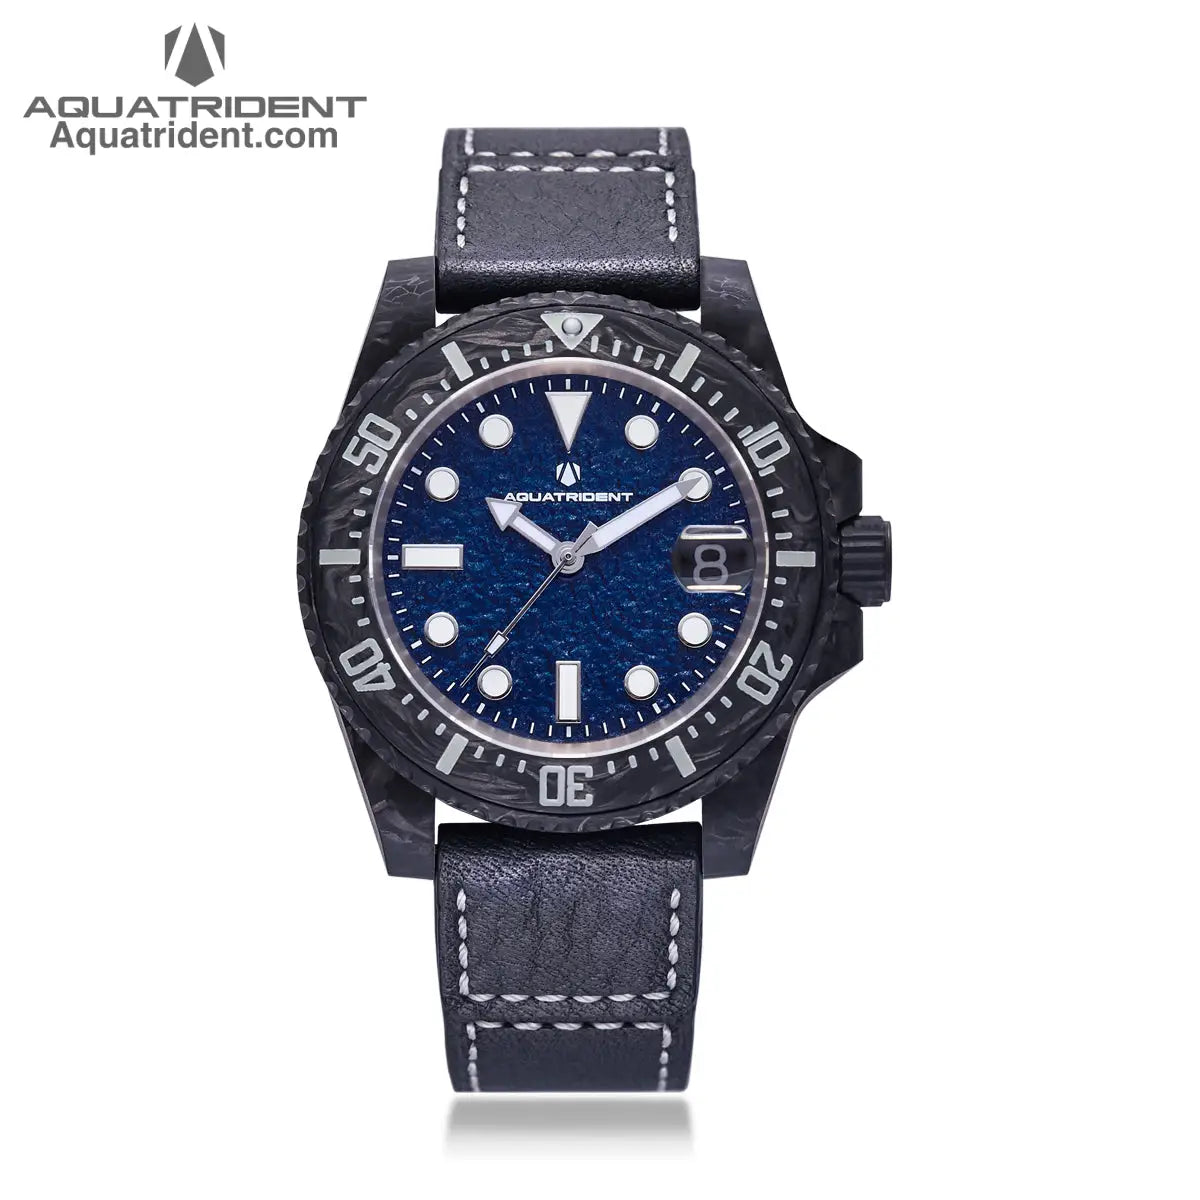 black carbon fiber case and bezel-dark blue rough textured dial with dates-black genuine leather strap-watch